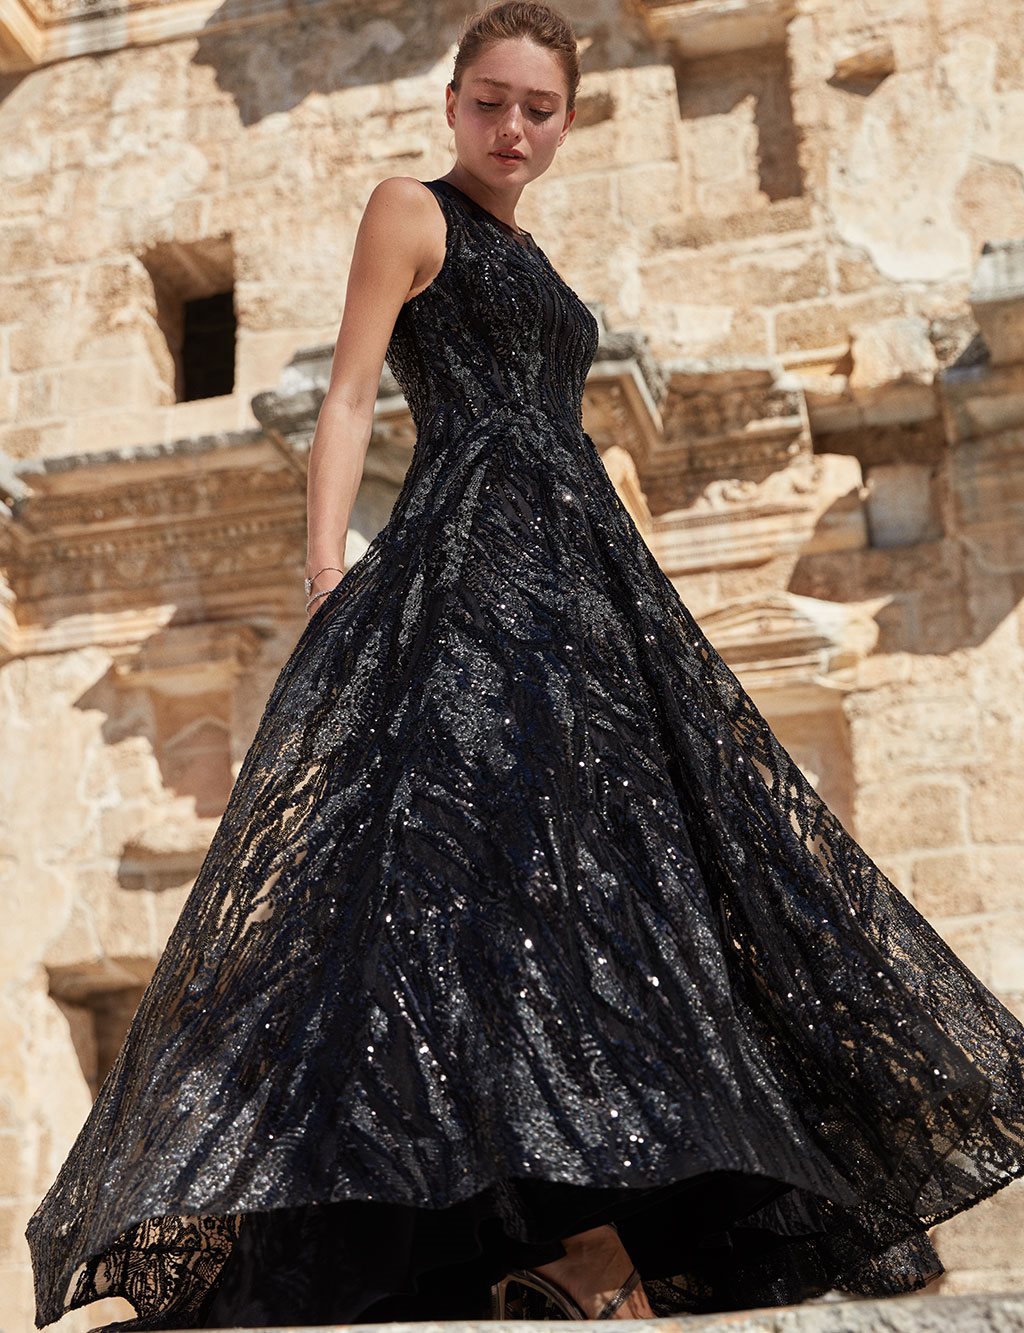 TIARA Collar Detailed Evening Gown With Sequin Details B9 26013 Black